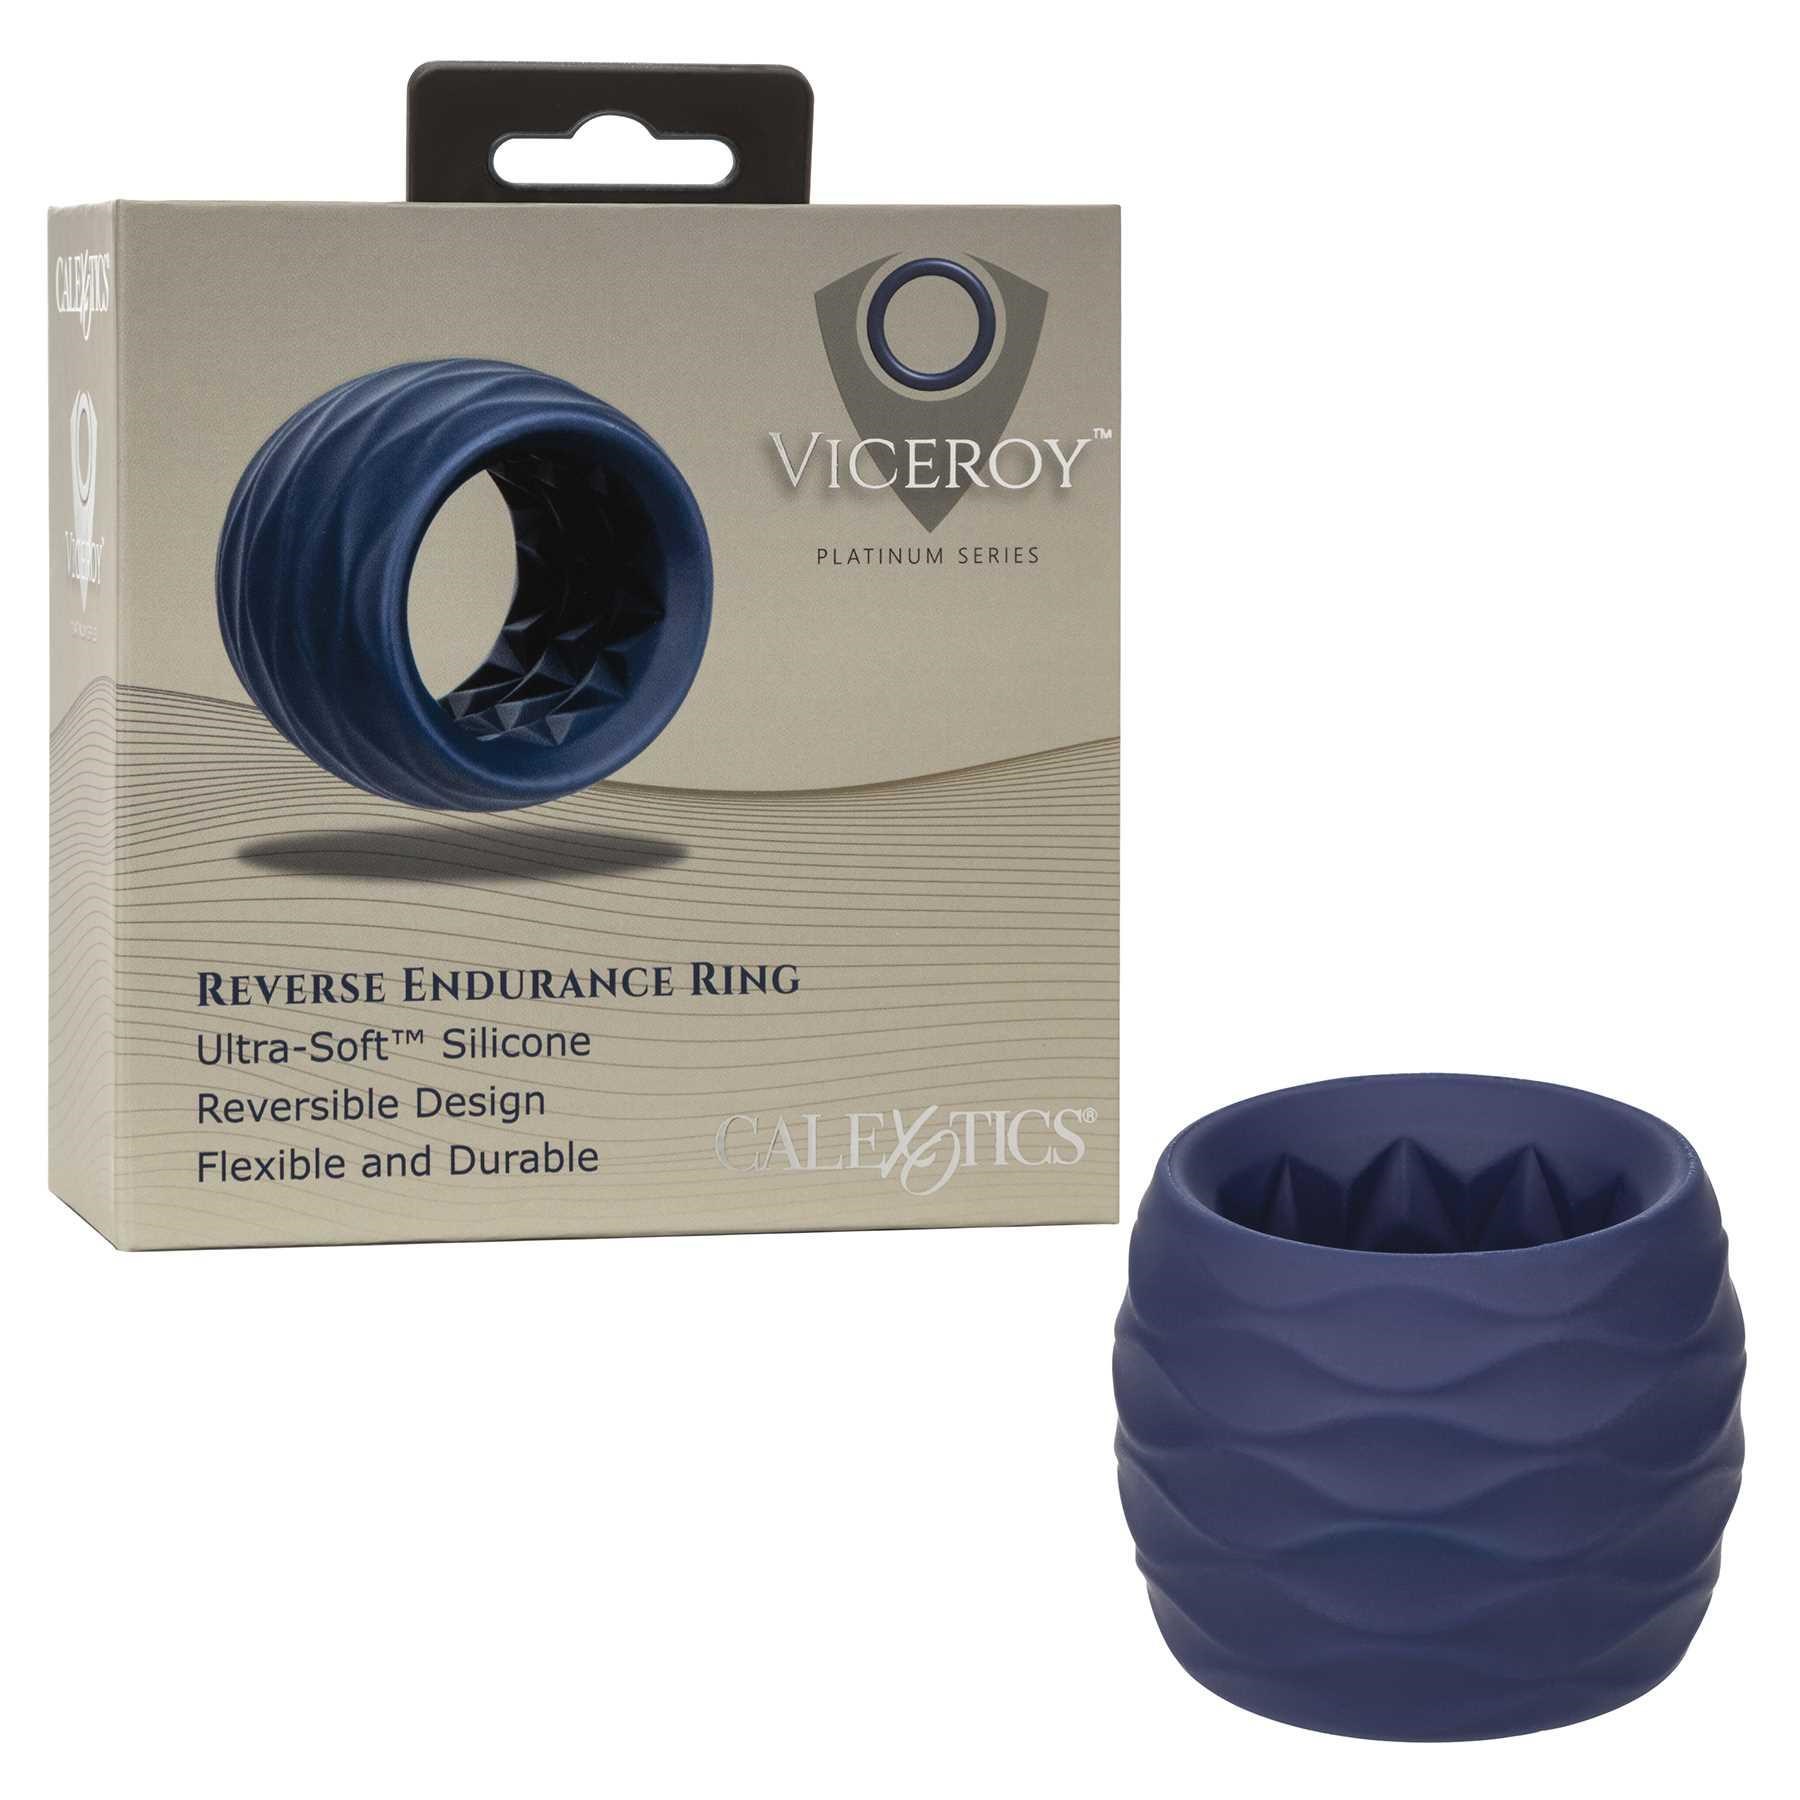 Viceroy Reverse Endurance Ring with box packaging